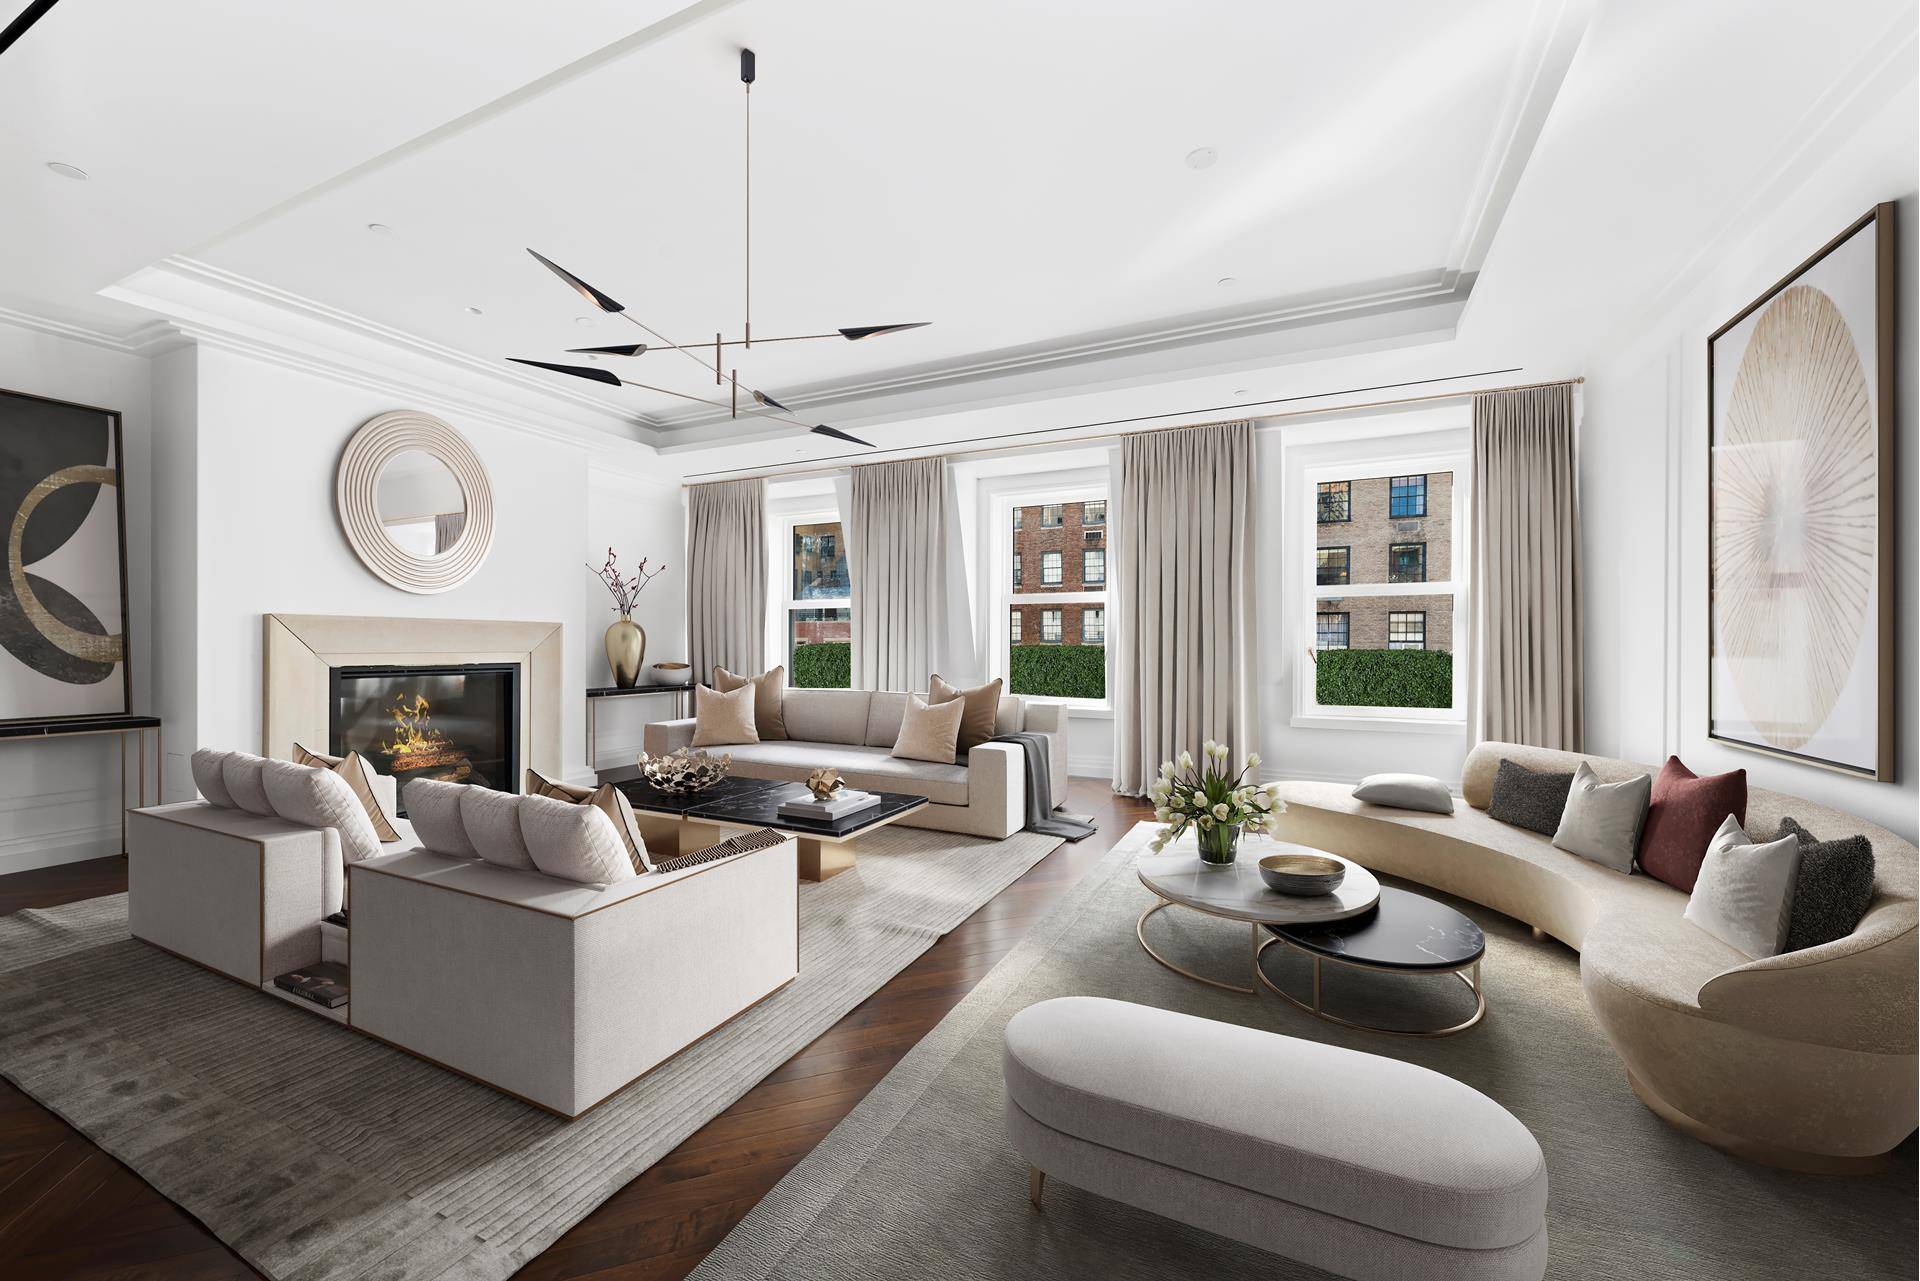 Brand new 5, 704 sq. ft. apartment in a chic boutique condominium with 1, 522 sq.